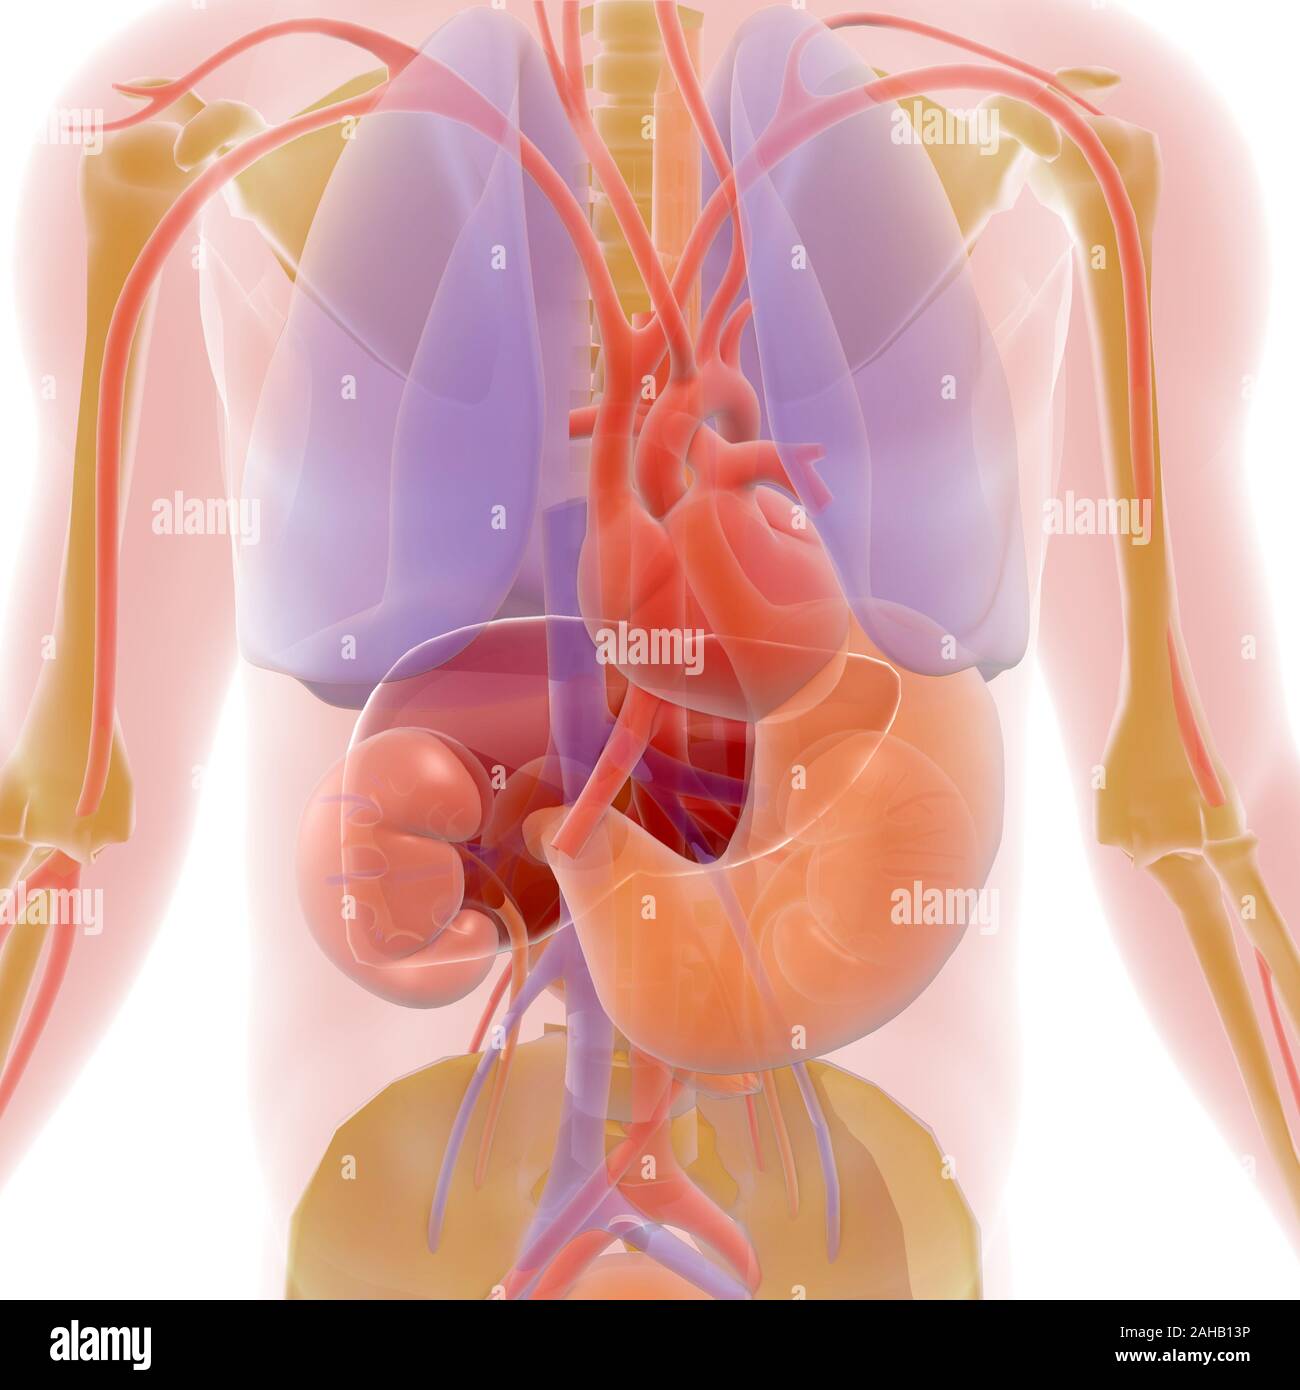 Transparent 3D illustration of human body interior showing organs, with natural colors. Stock Photo